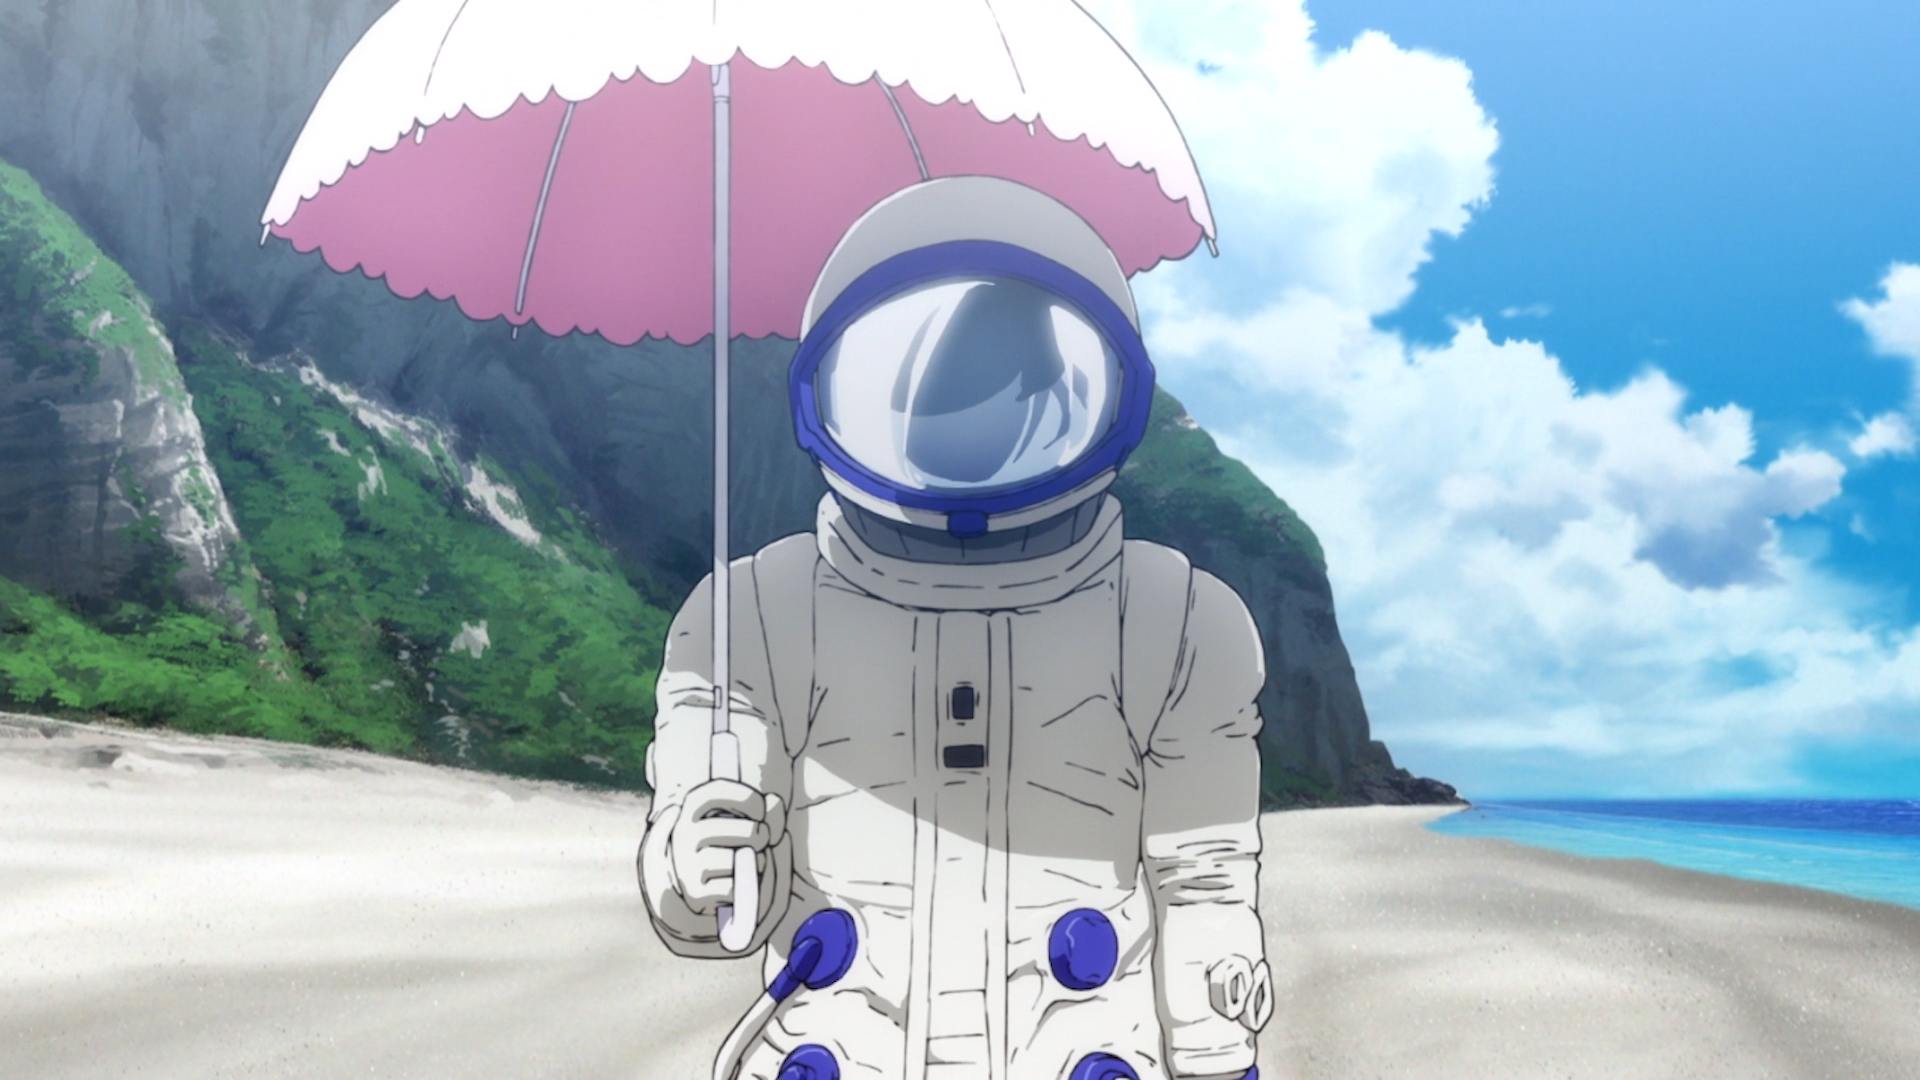 Rinne Ohara strolls the beach with a parasol and a full body space-suit to keep the sun off in a scene from the 2018 ISLAND TV anime.